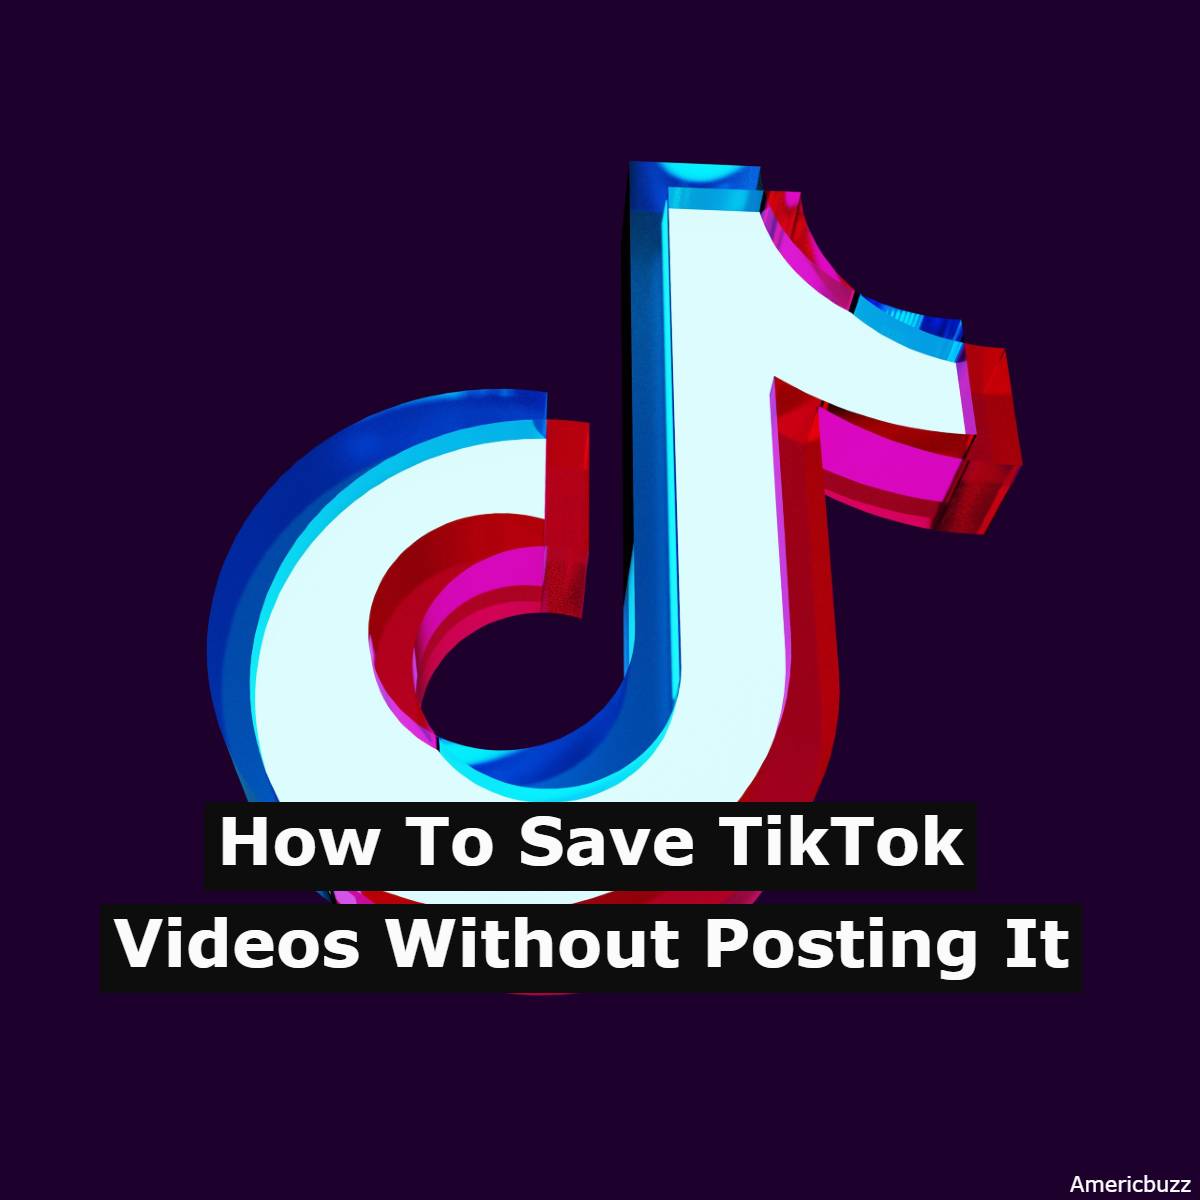 How To Save TikTok Videos Without Posting It